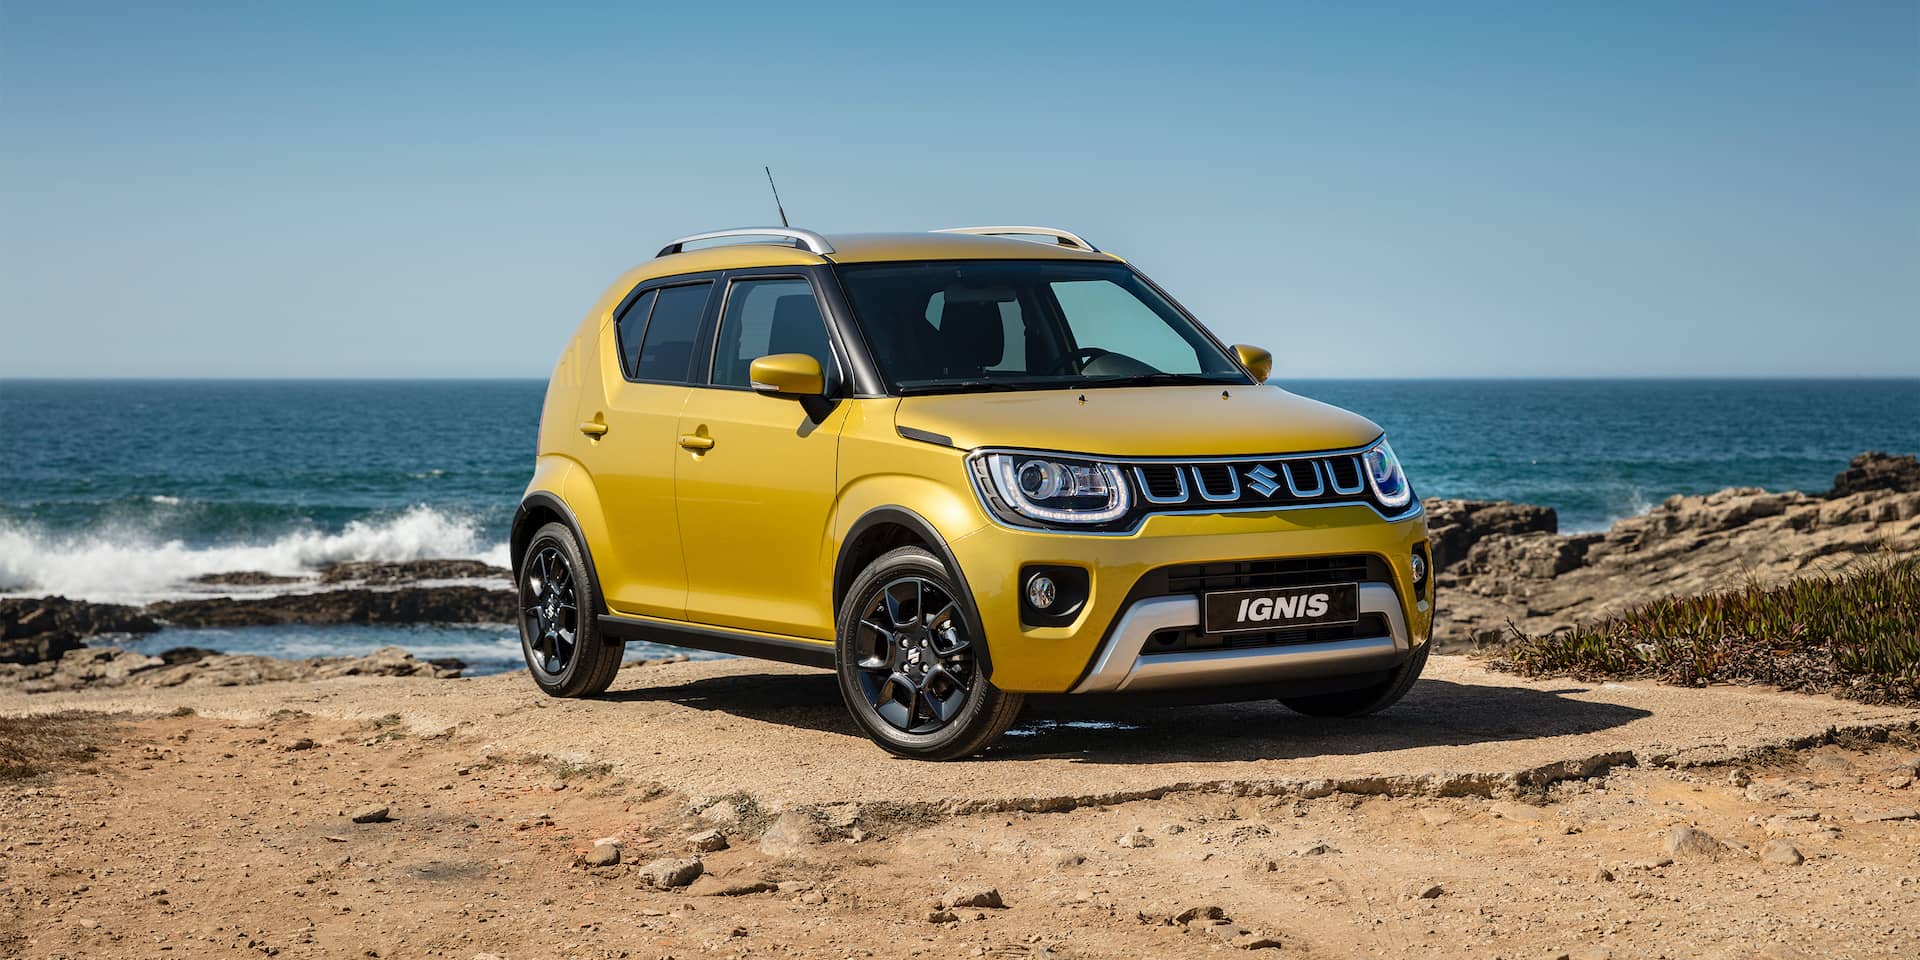 Facelifted Suzuki Ignis debuts | The Car Expert